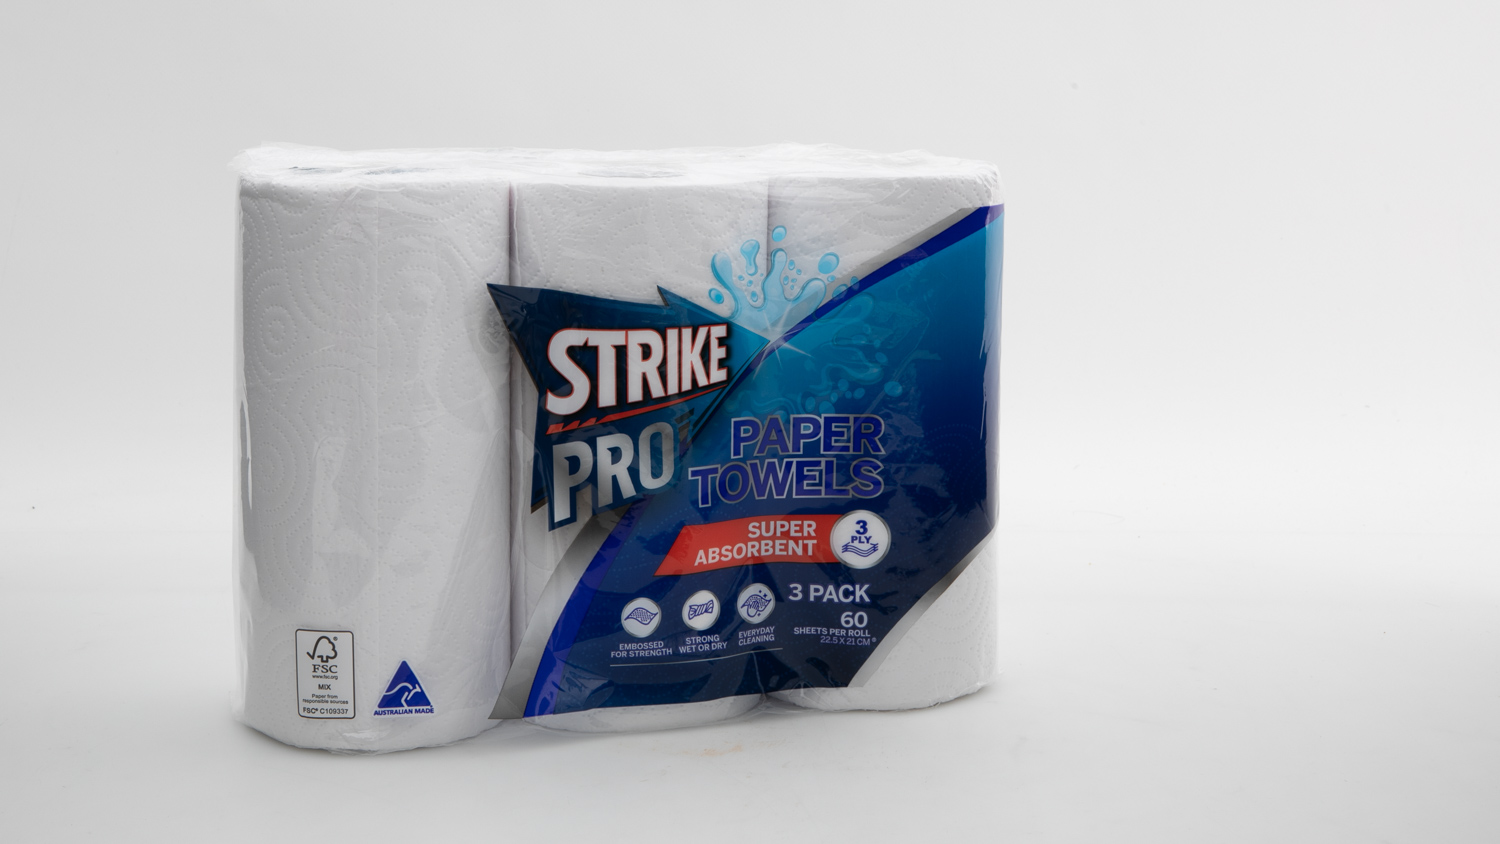 Woolworths Strike Pro Paper Towels carousel image